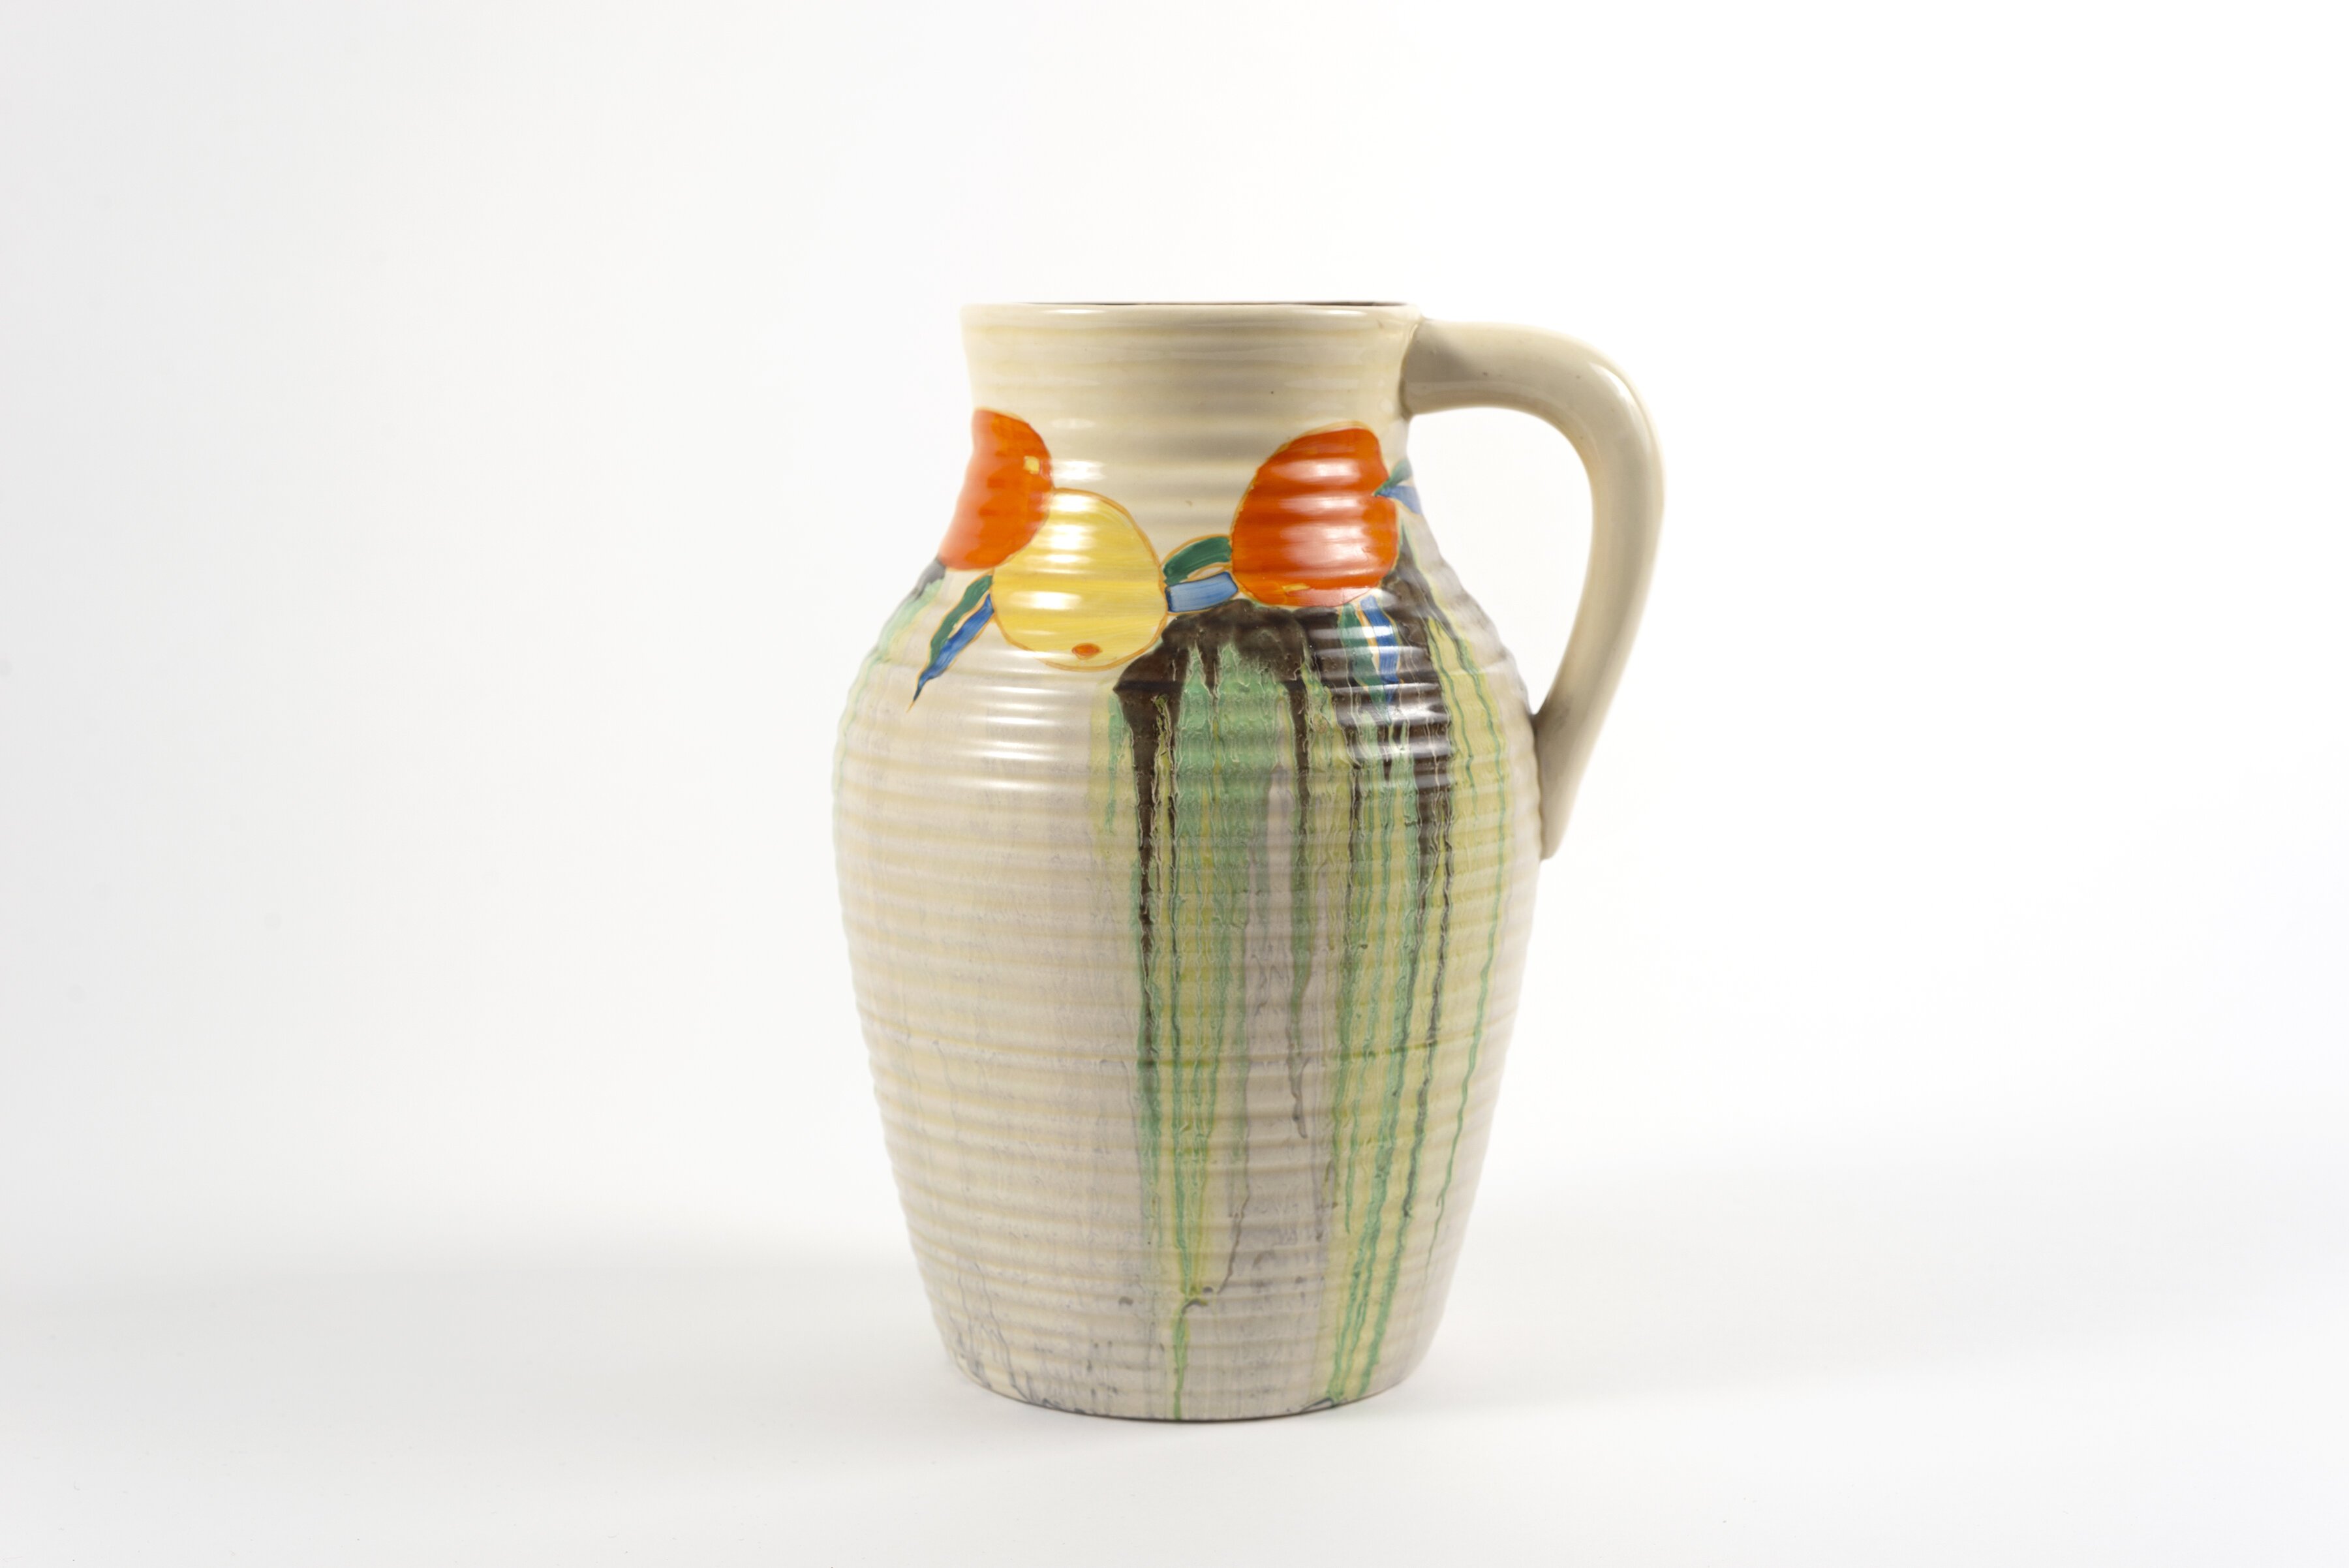 Clarice Cliff. English, 1899 - 1972. Fantasque Pitcher. late 1920s/early 1930s. Painted ceramic. 11 1/2 × 8 1/2 × 7 3/4 in. (29.2 × 21.6 × 19.7 cm). Gift of Janis and William Wetsman. 2016.114